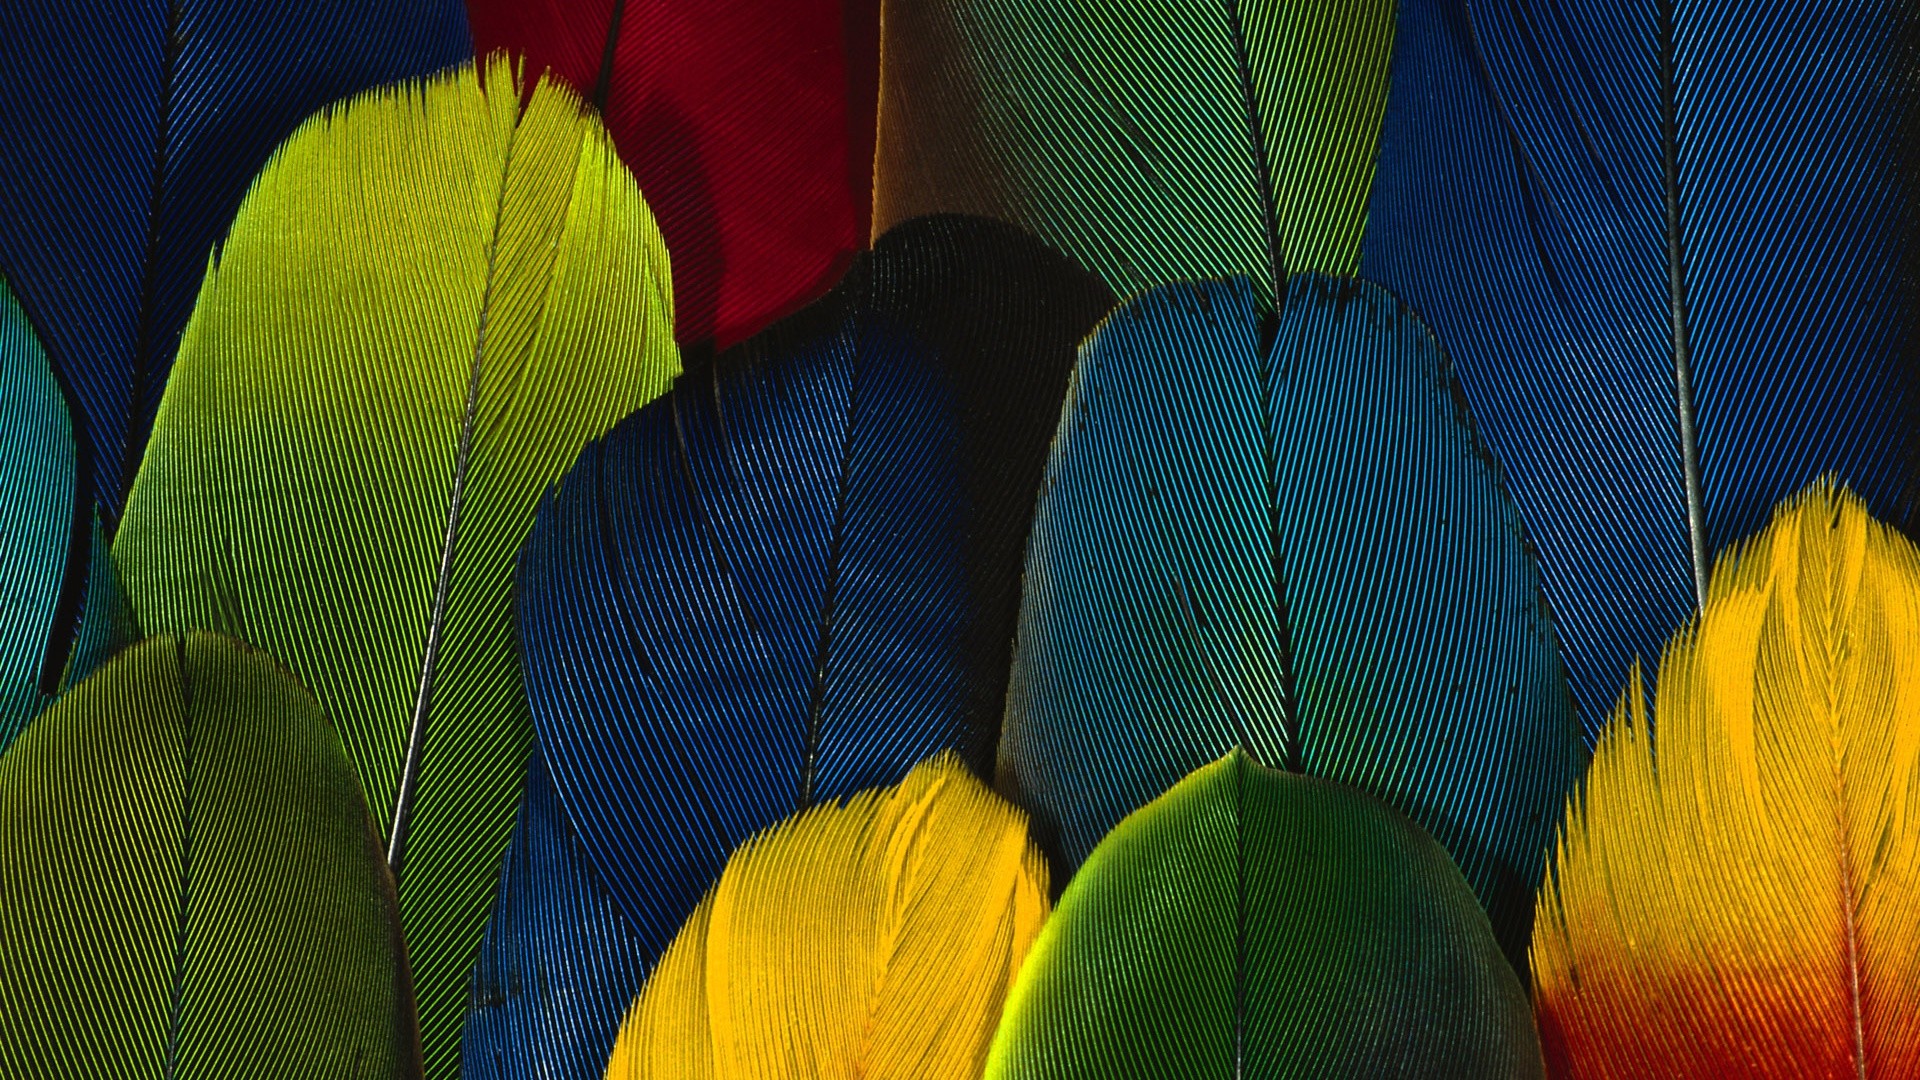 1920x1080 Abstract Colorful Feathers Free High Definition Wallpapers